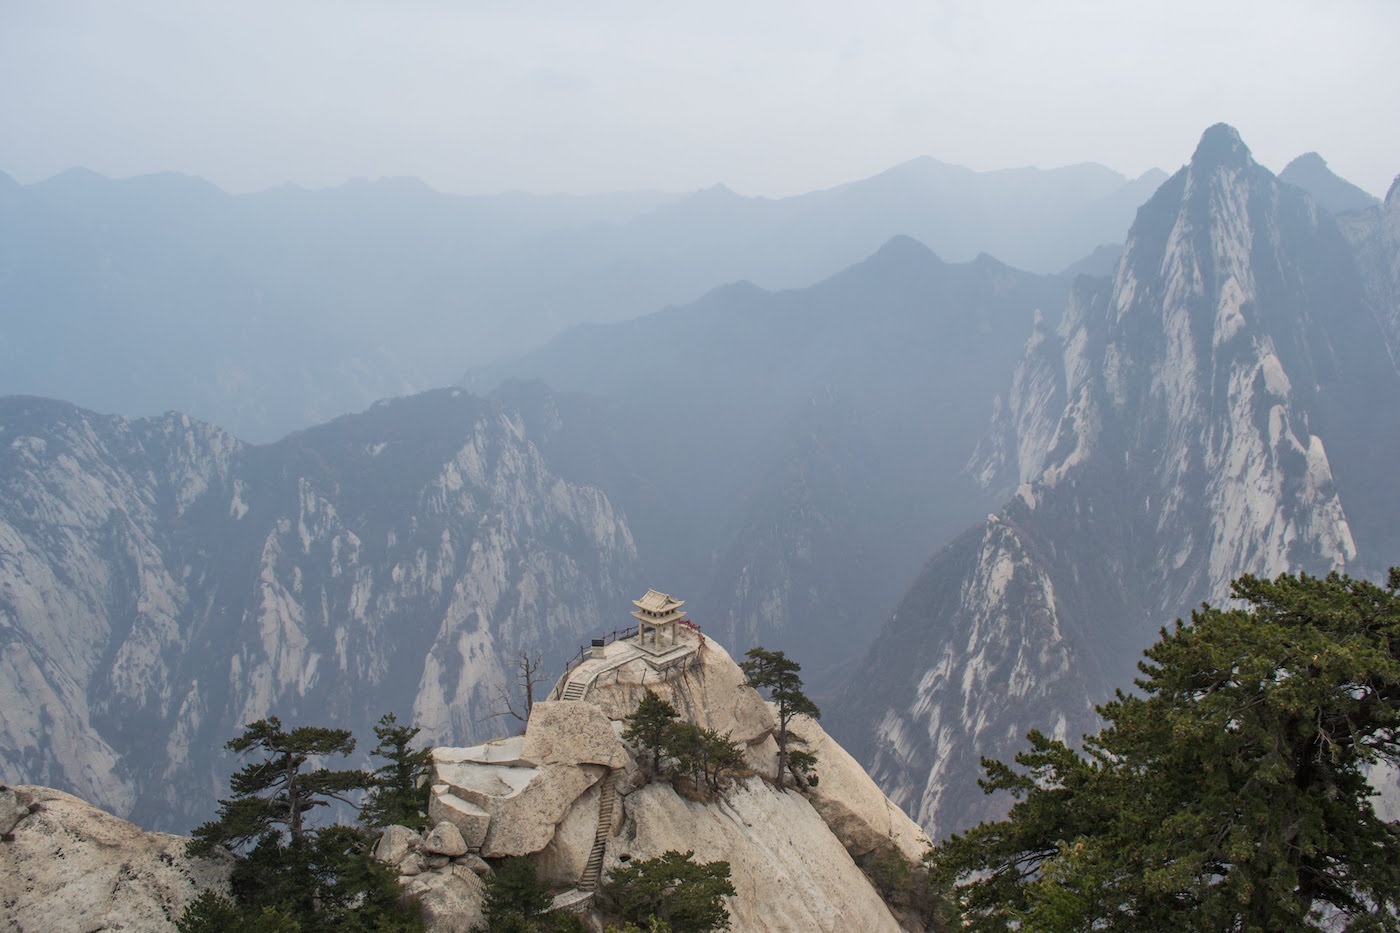 At Mount Huashan in China, there is a tiny pavilion on the top of a mountain that overlooks the mountains around it.